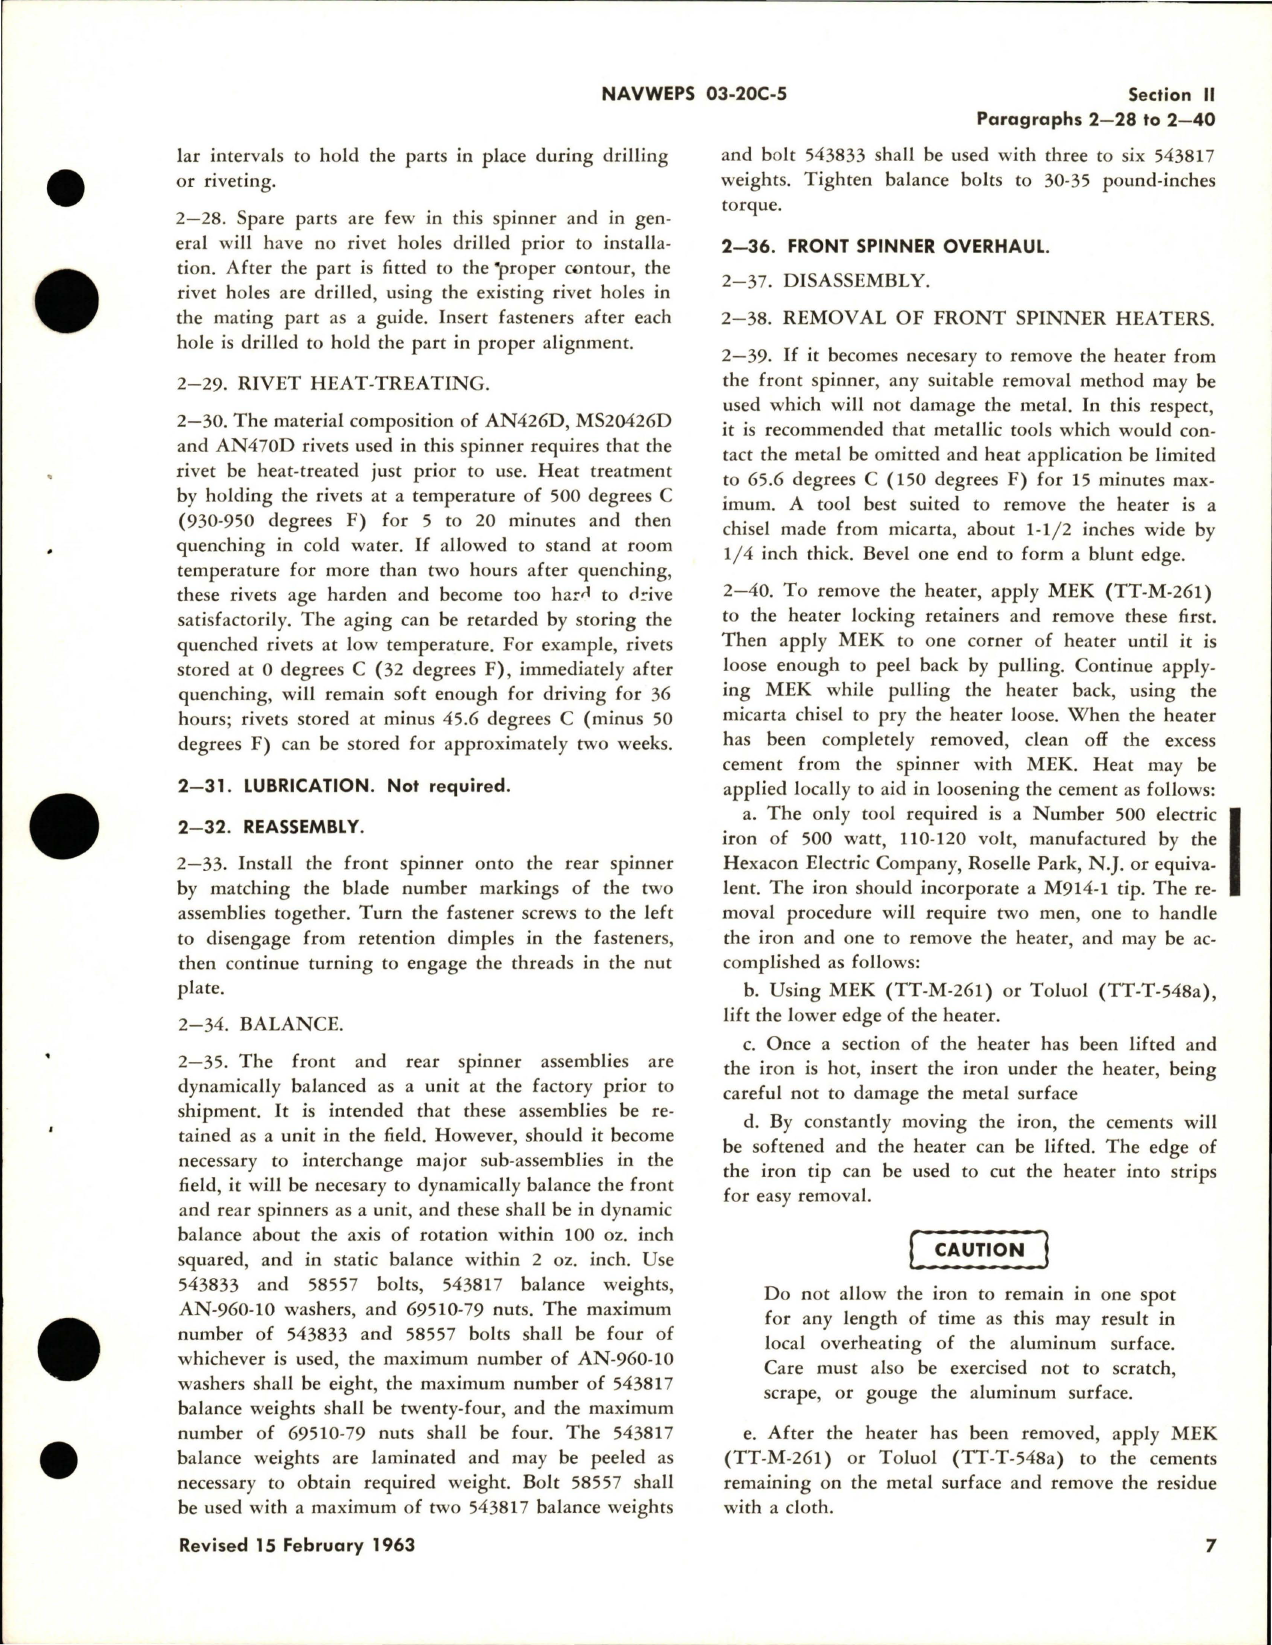 Sample page 5 from AirCorps Library document: Overhaul Instructions for Aircraft Propeller Spinner and Anti-Icing - Assembly No. 535247